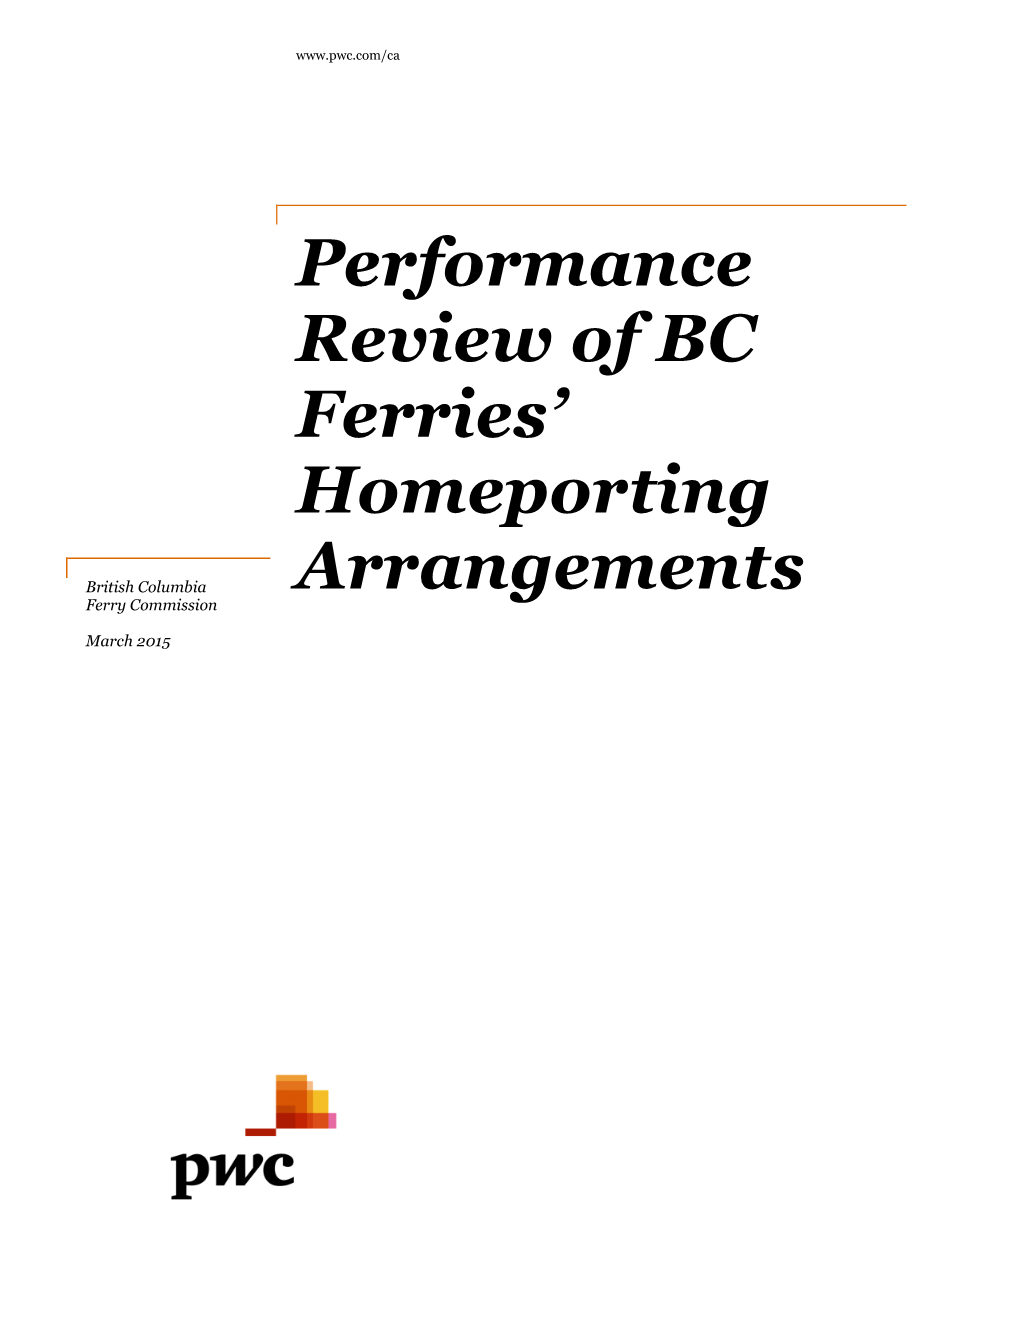 Performance Review of BC Ferries' Homeporting Arrangements